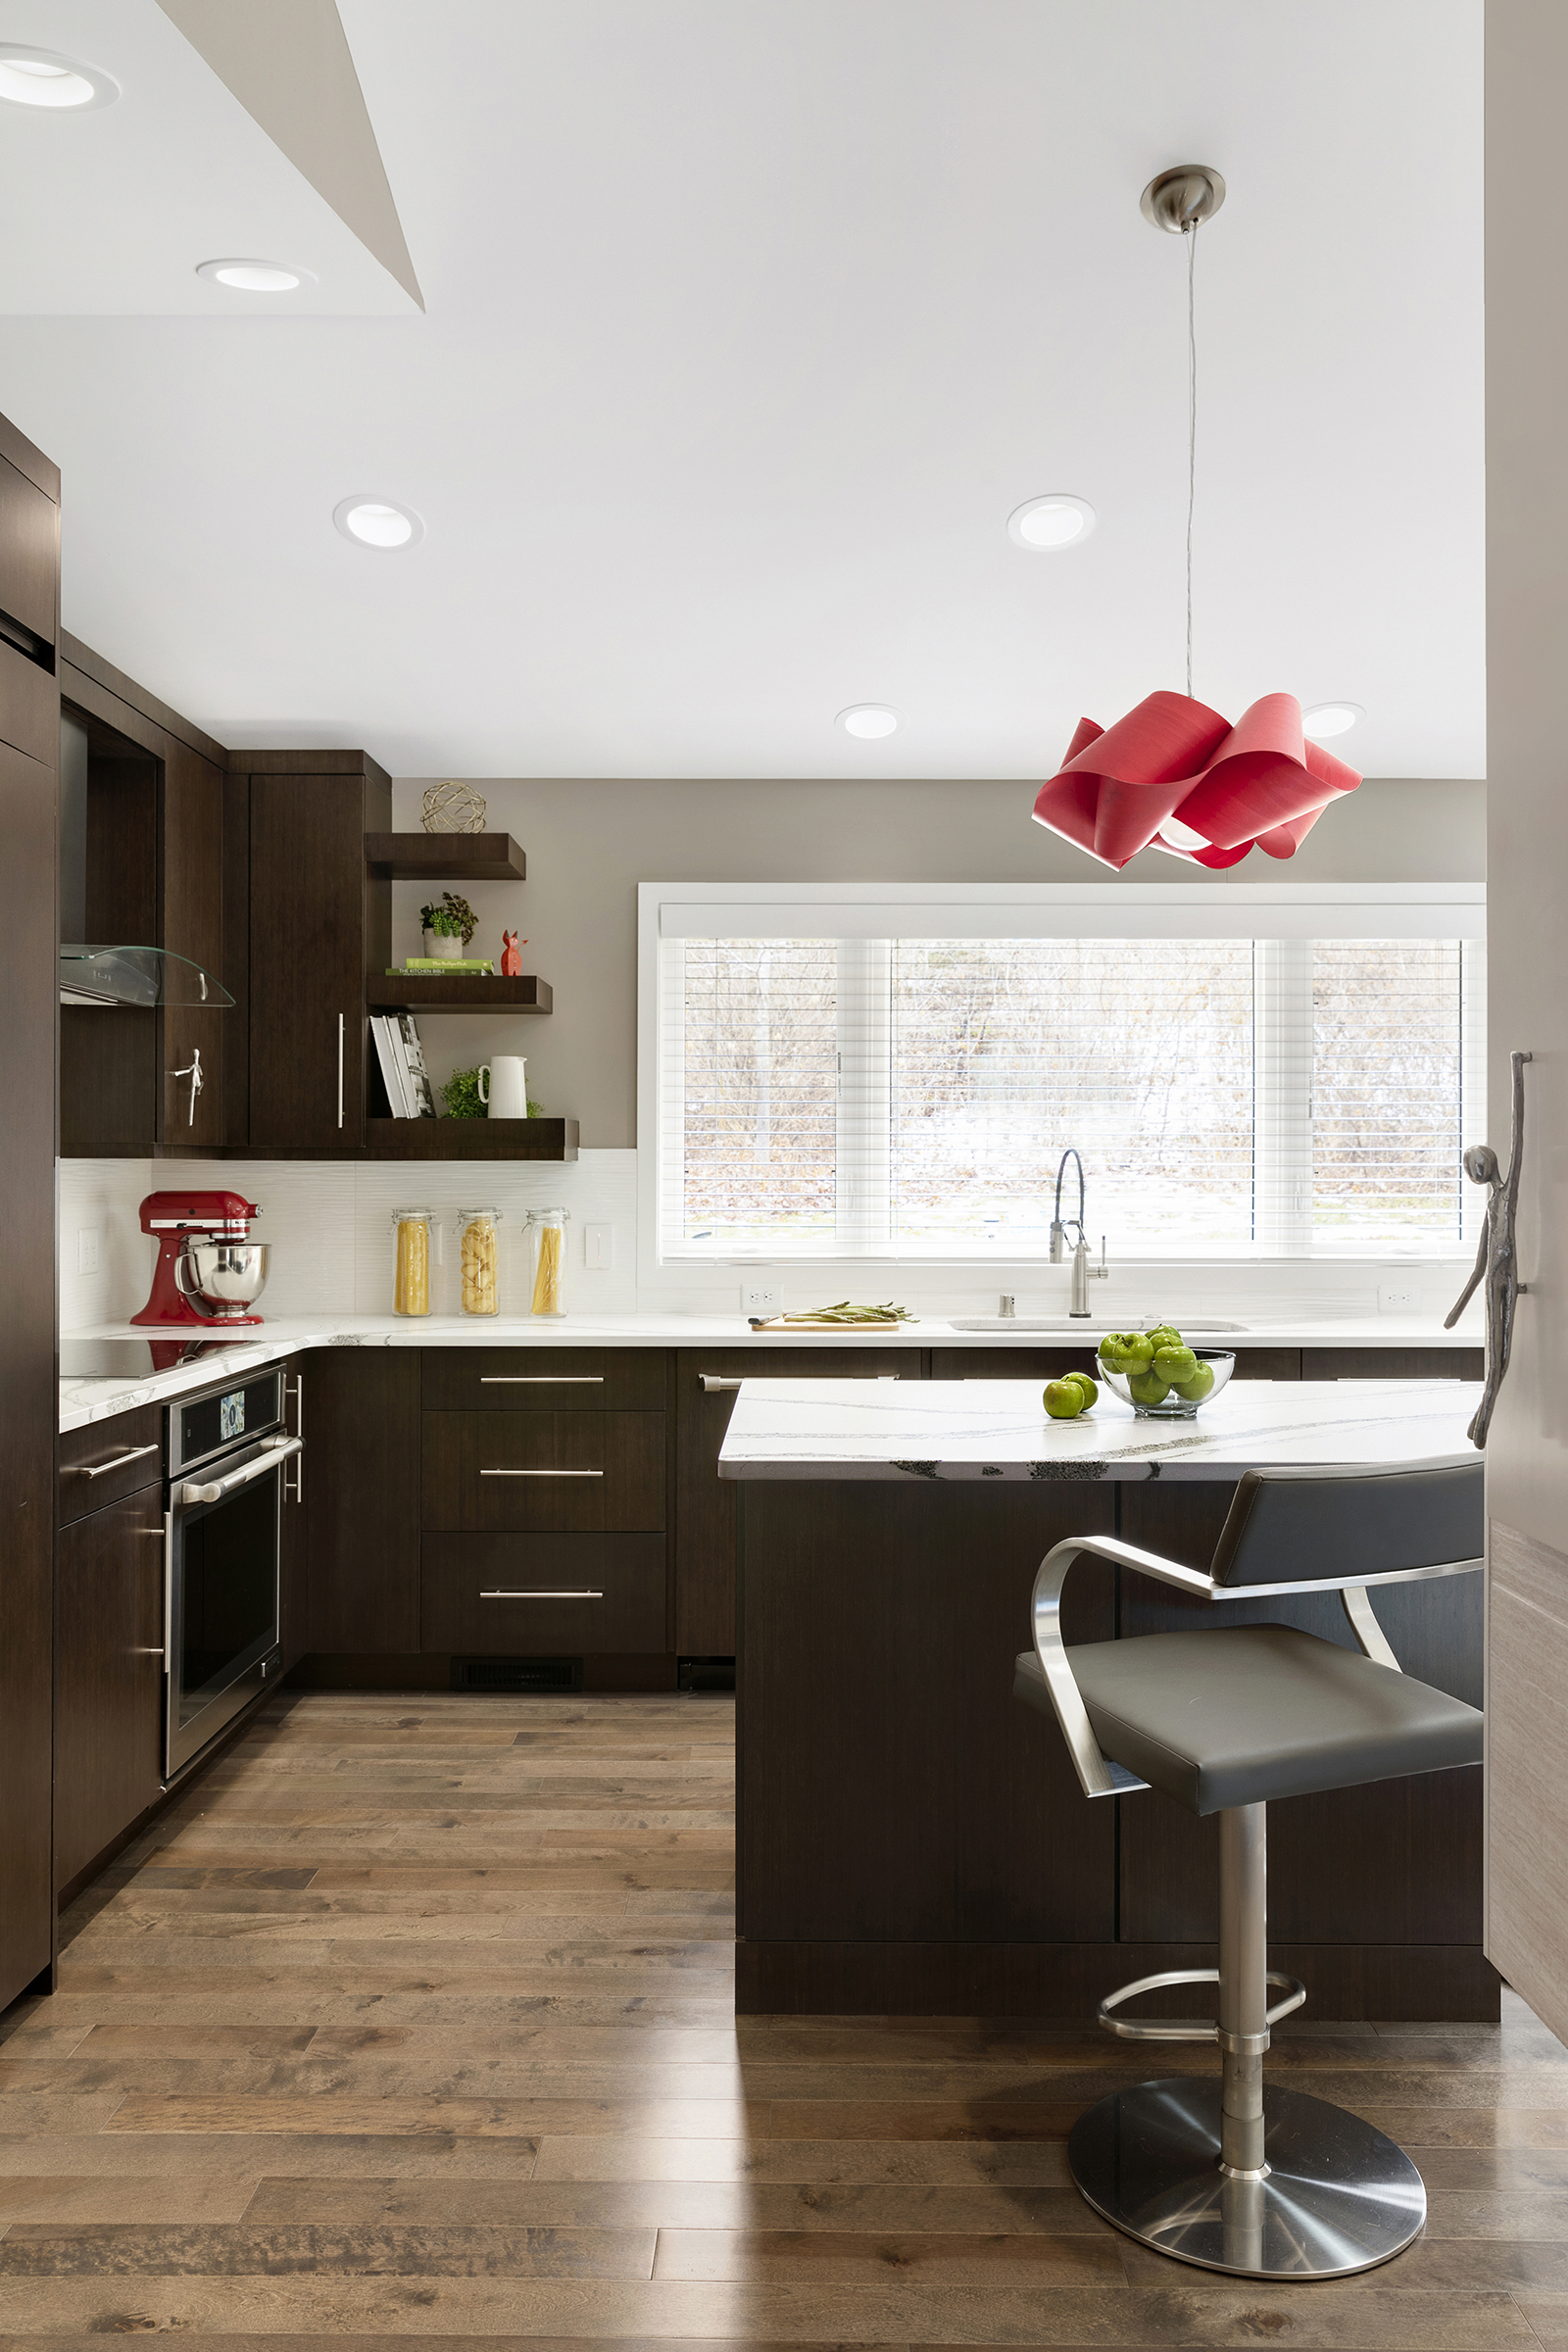 Modern kitchen remodel with dark wood cabinets and accent lighting